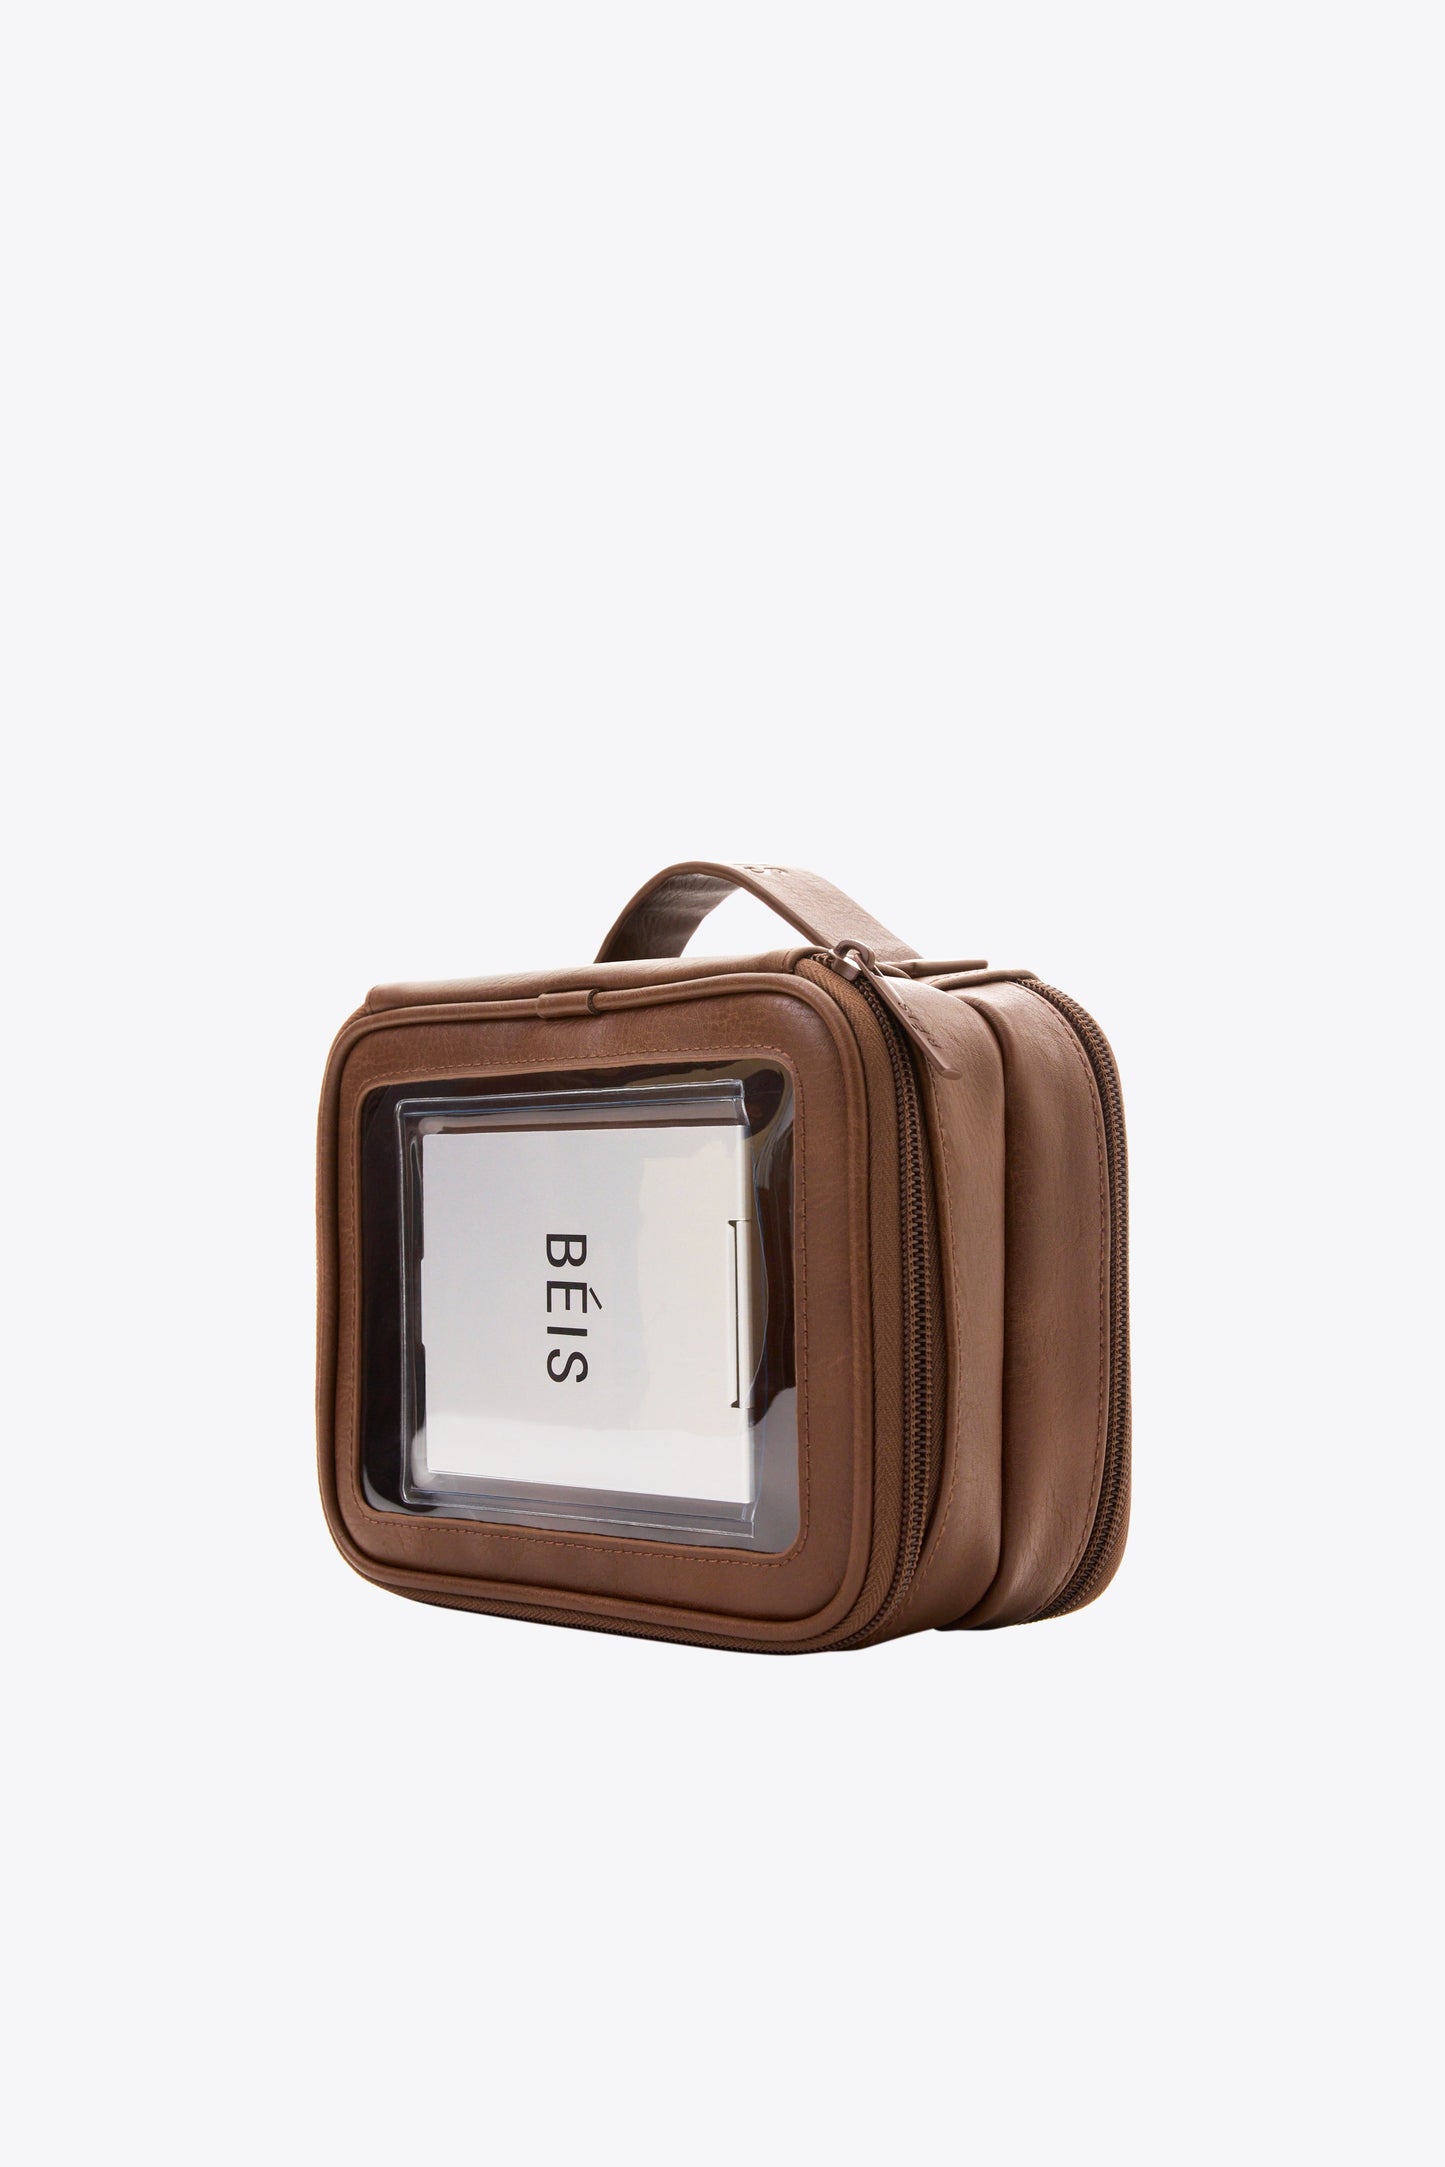 The On The Go Essential Case in Maple